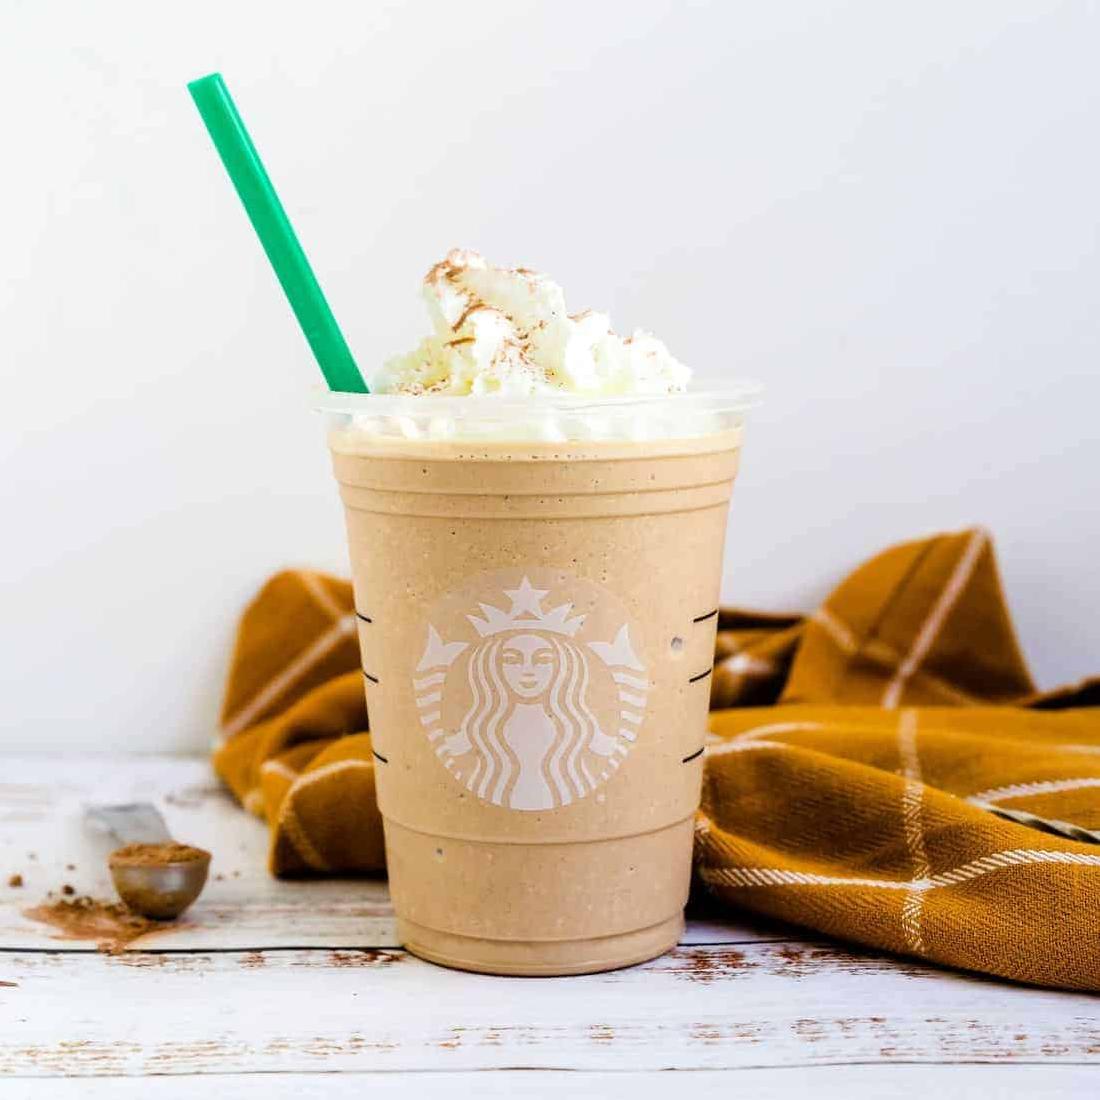  Chillax with a Starbucks Mocha Frappe on a hot summer day!